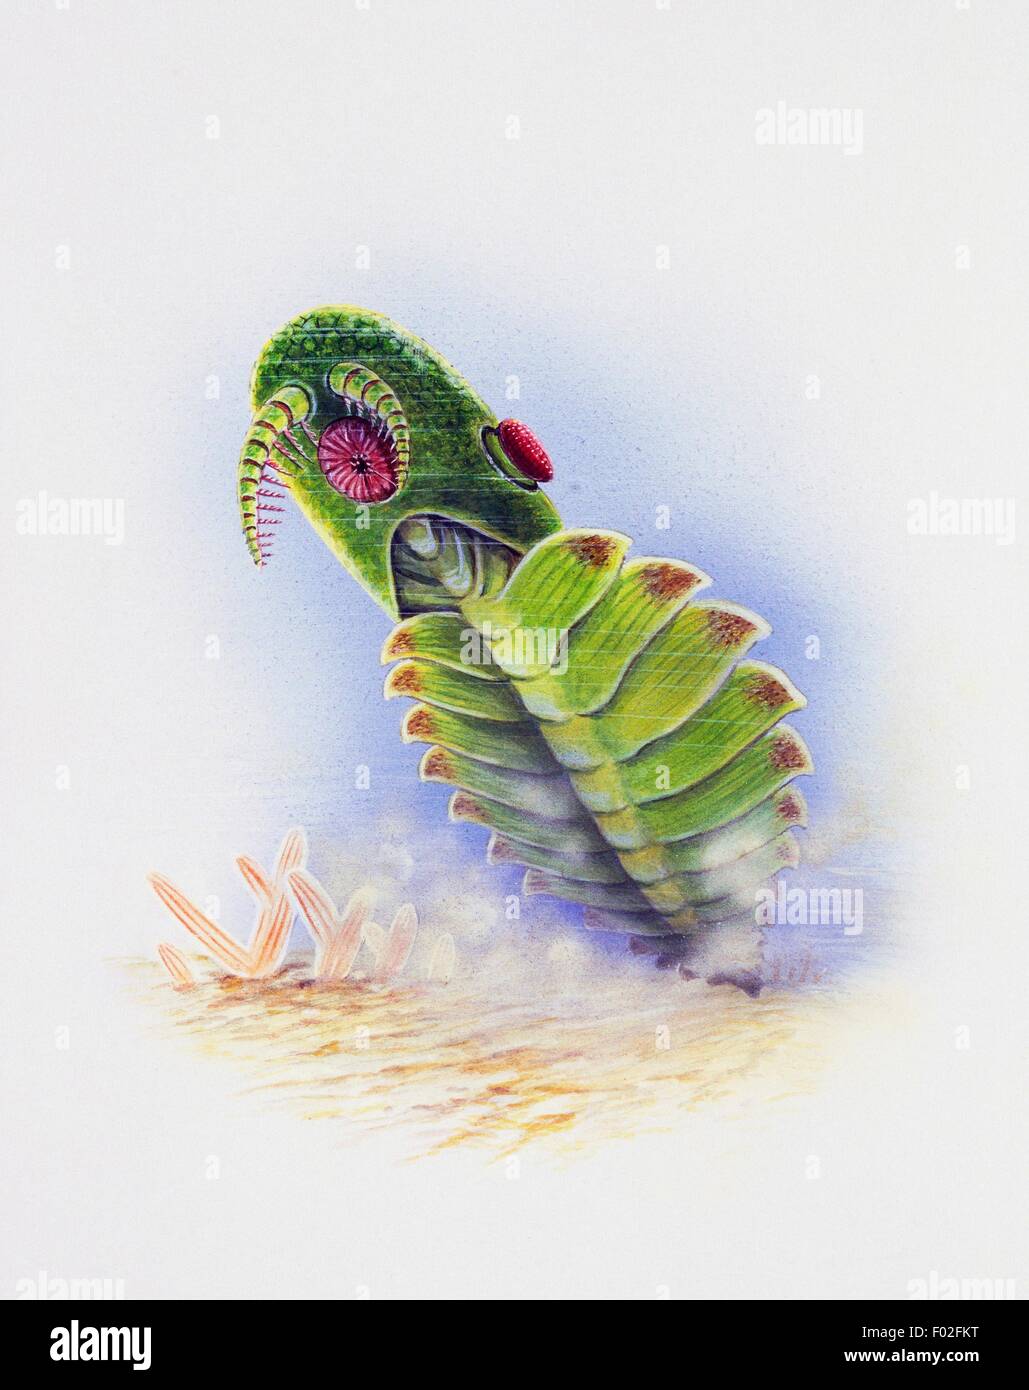 Anomalocaris sp, Anomalocarididae, Early Cambrian. Artwork by Ibrin Edwards. Stock Photo